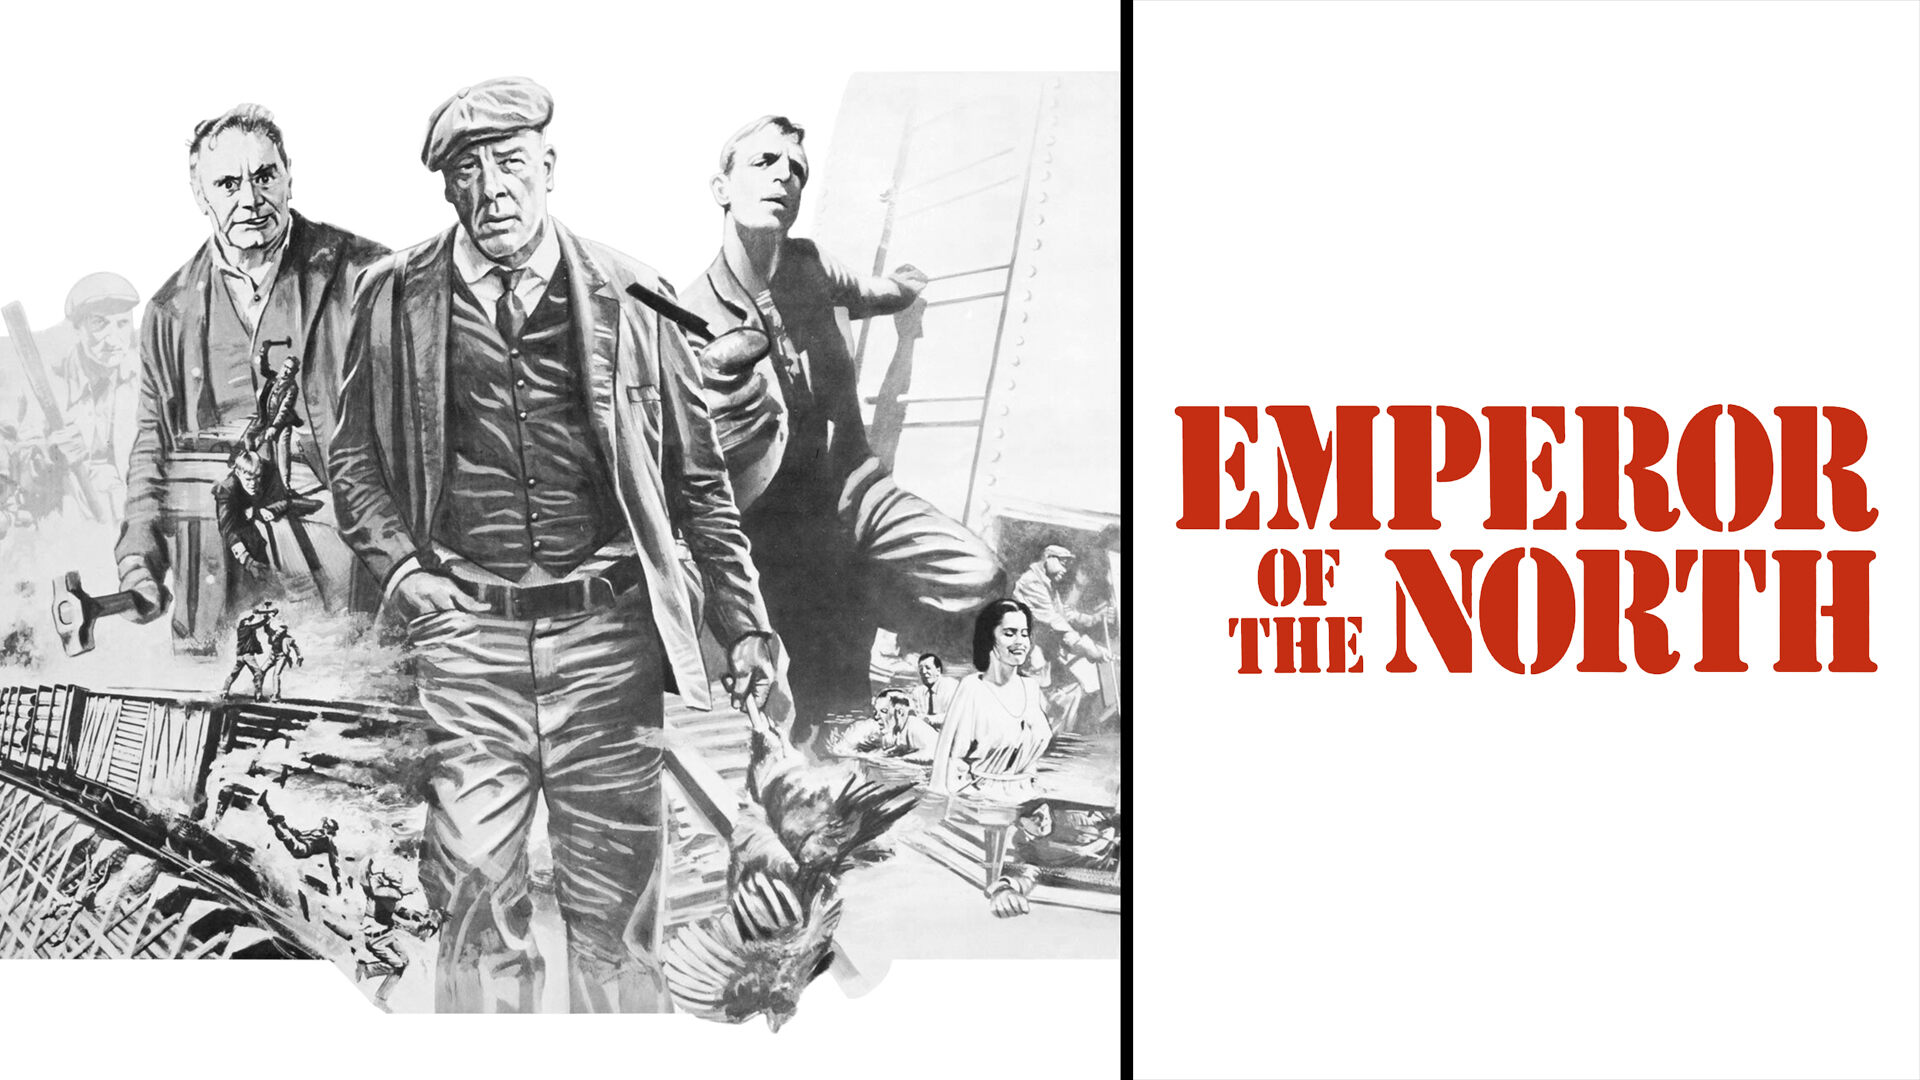 41-facts-about-the-movie-emperor-of-the-north-pole